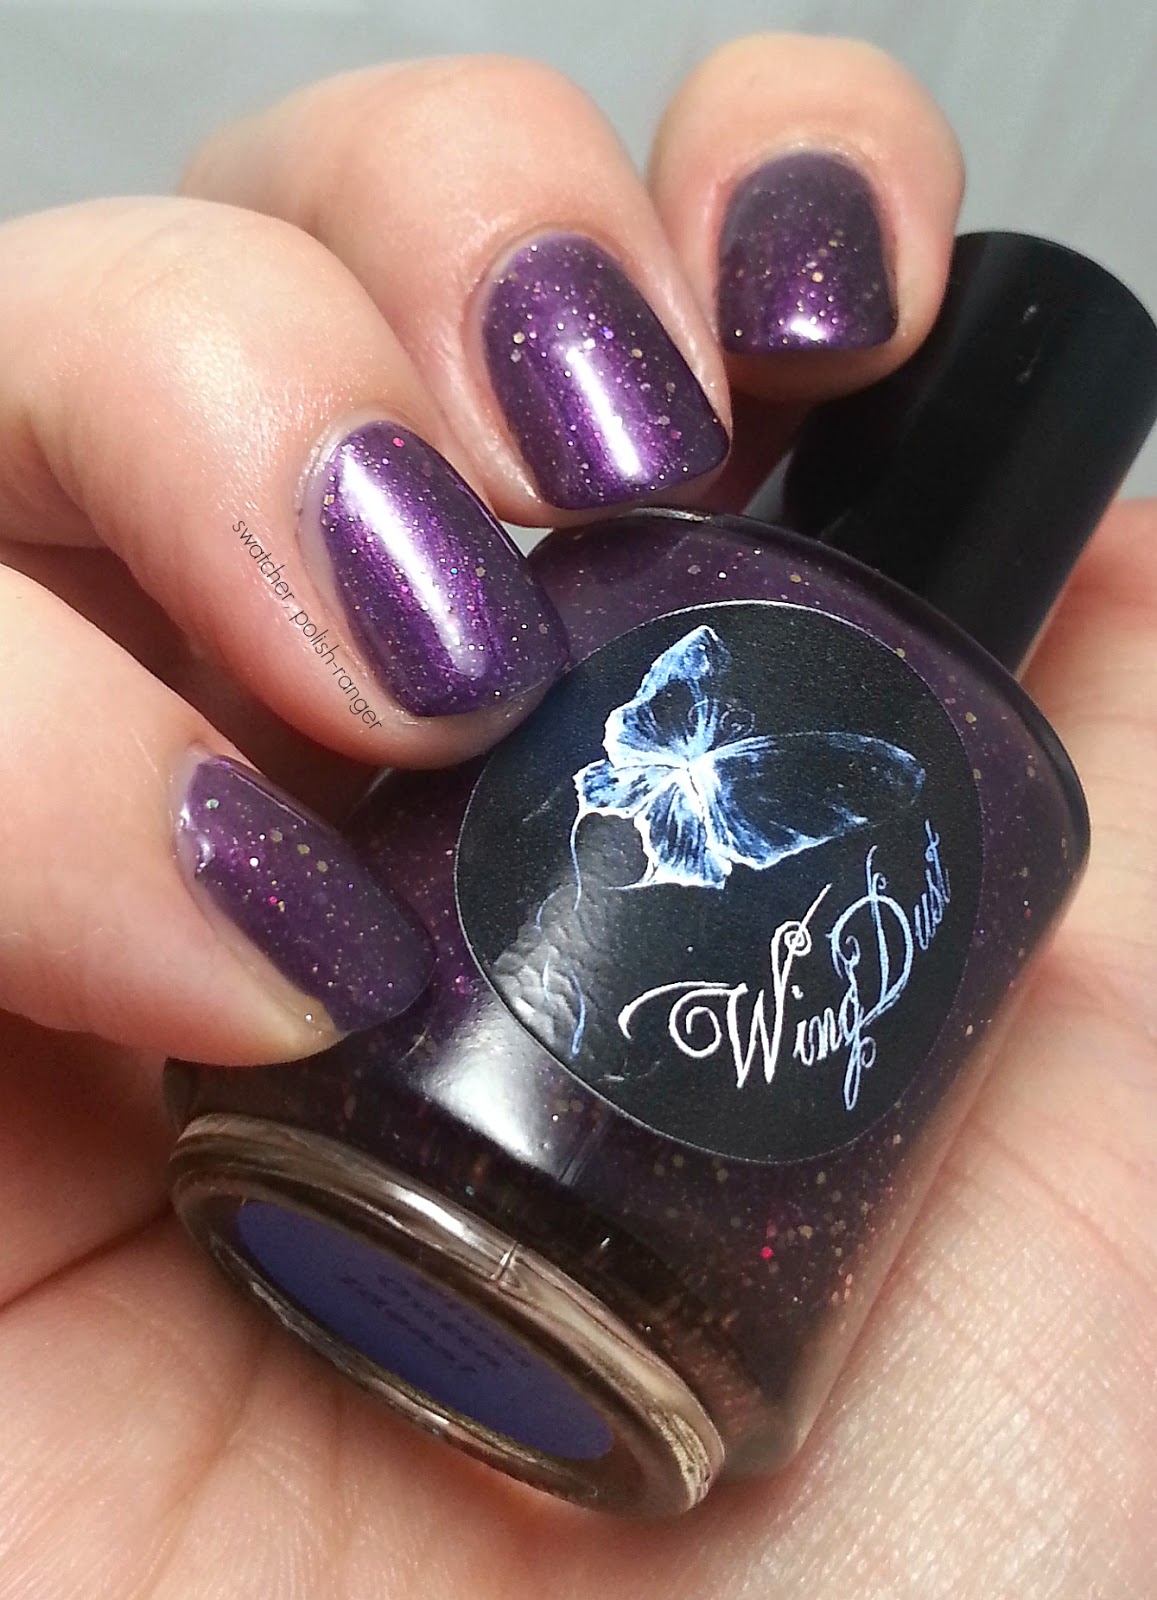 Wingdust Collections Plum Outta Ideas swatch